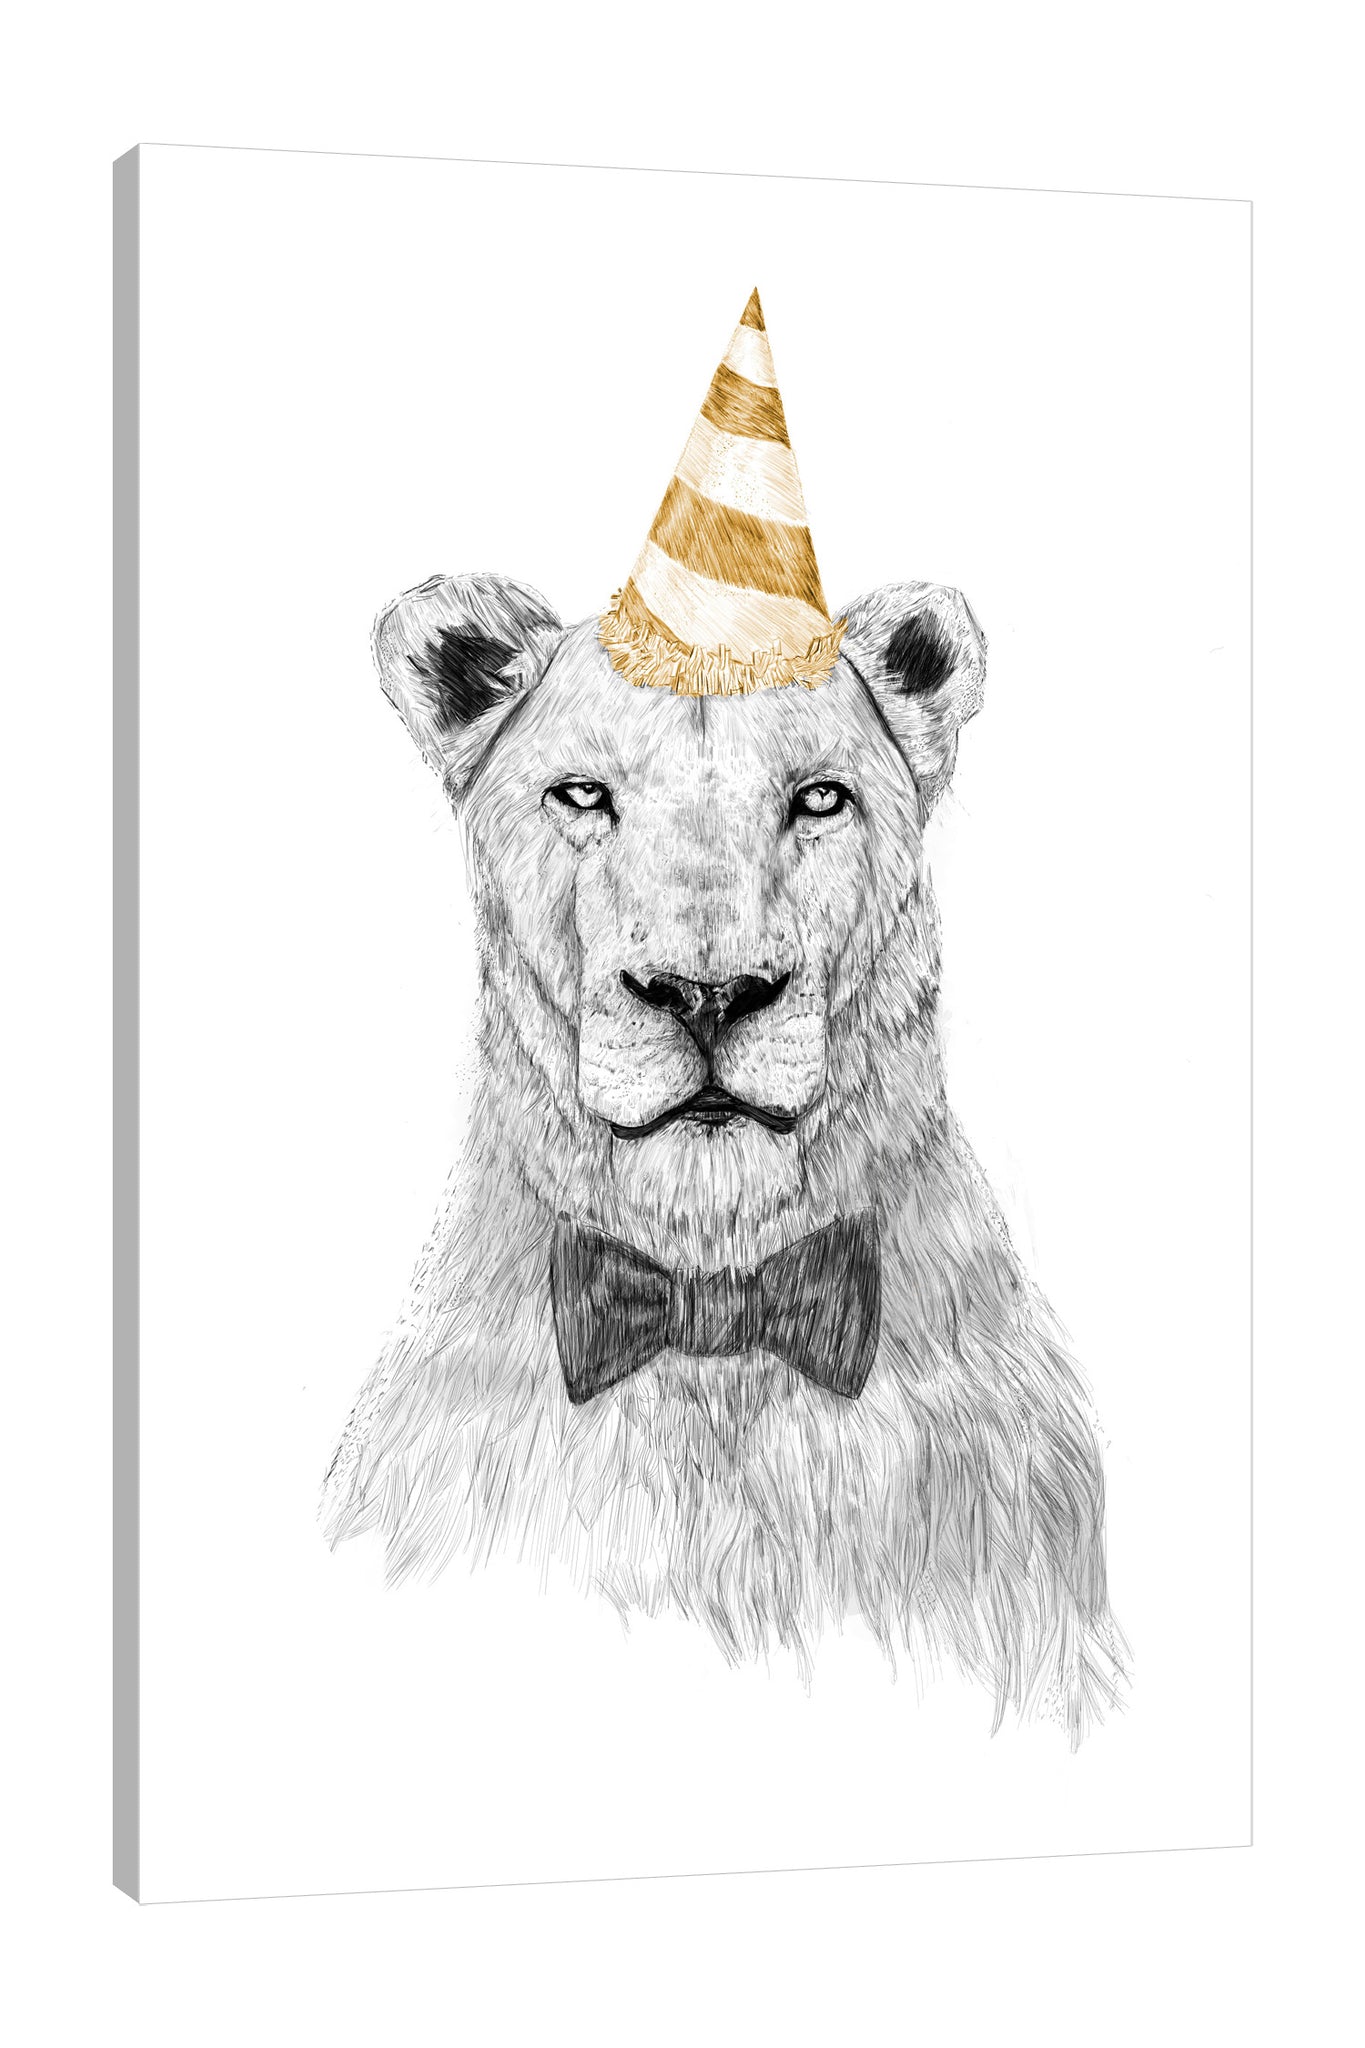 Balazs-Solti,Modern & Contemporary,Animals,Entertainment,animals,animal,lion,lions,bow,bows,party hat,party hats,parties,lines,strokes,line,stroke,black and white,yellow,Blue,White